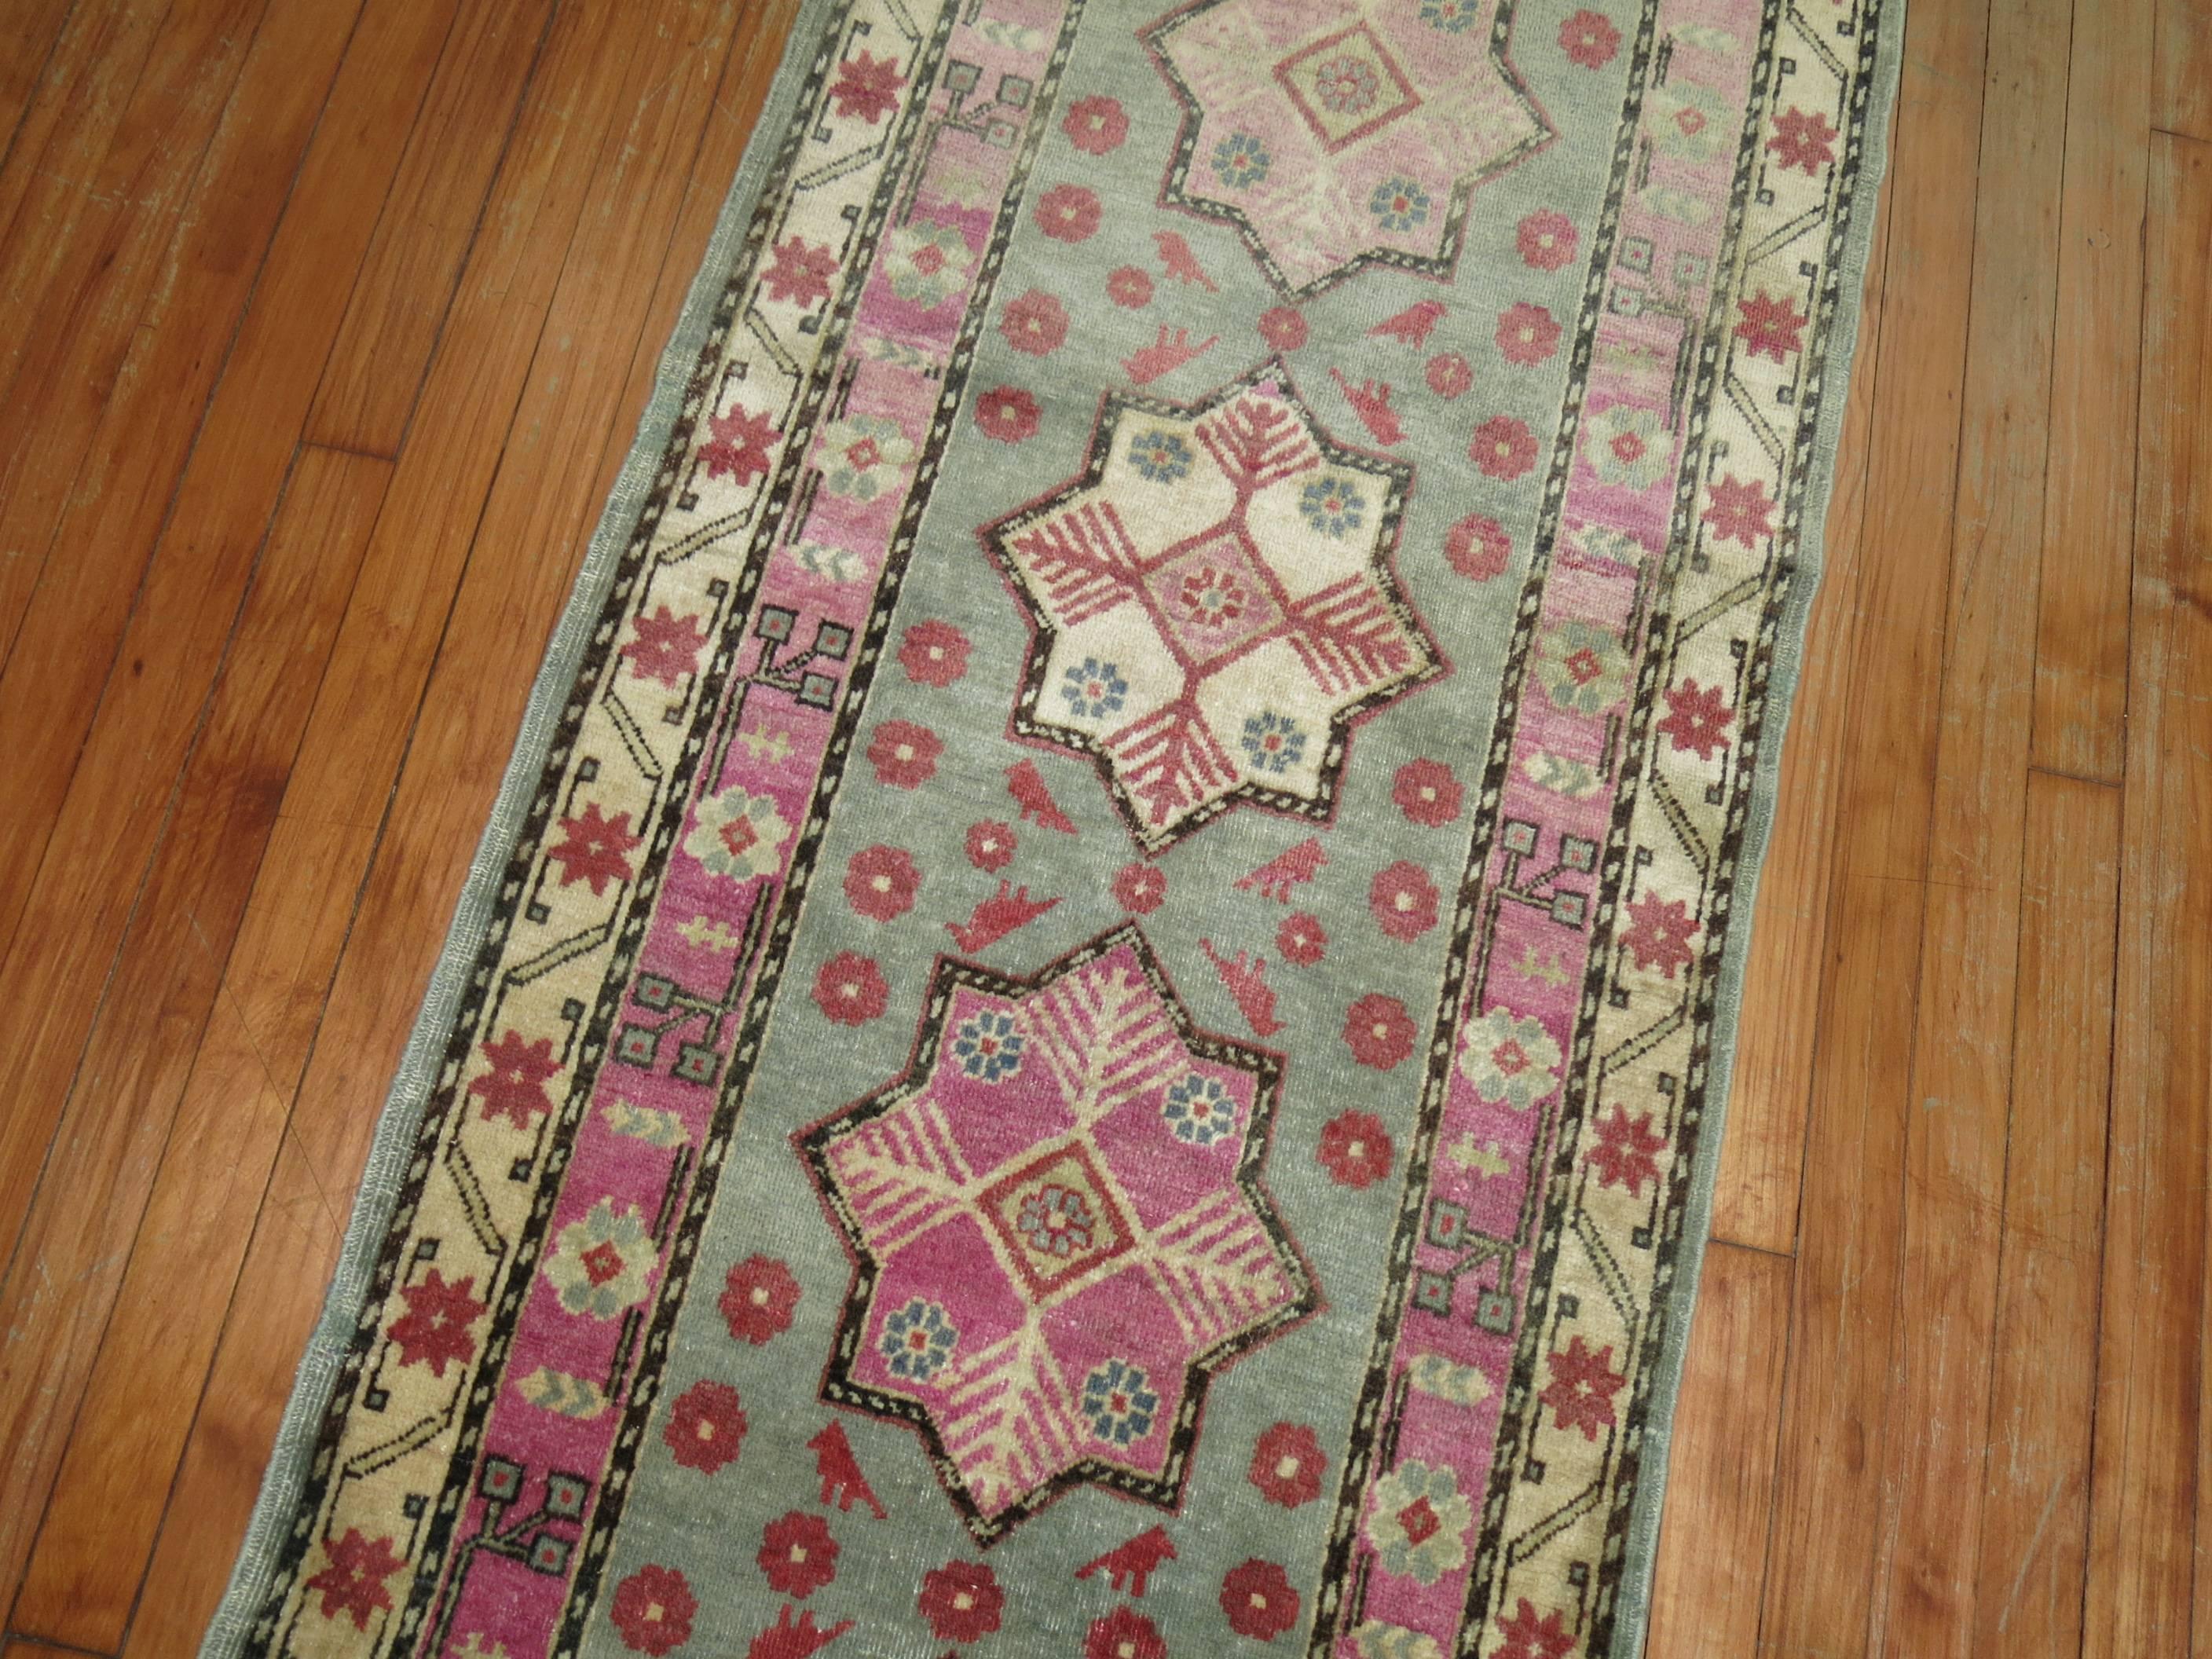 Hand-Woven Vintage Khotan Runner in Pinks and Green